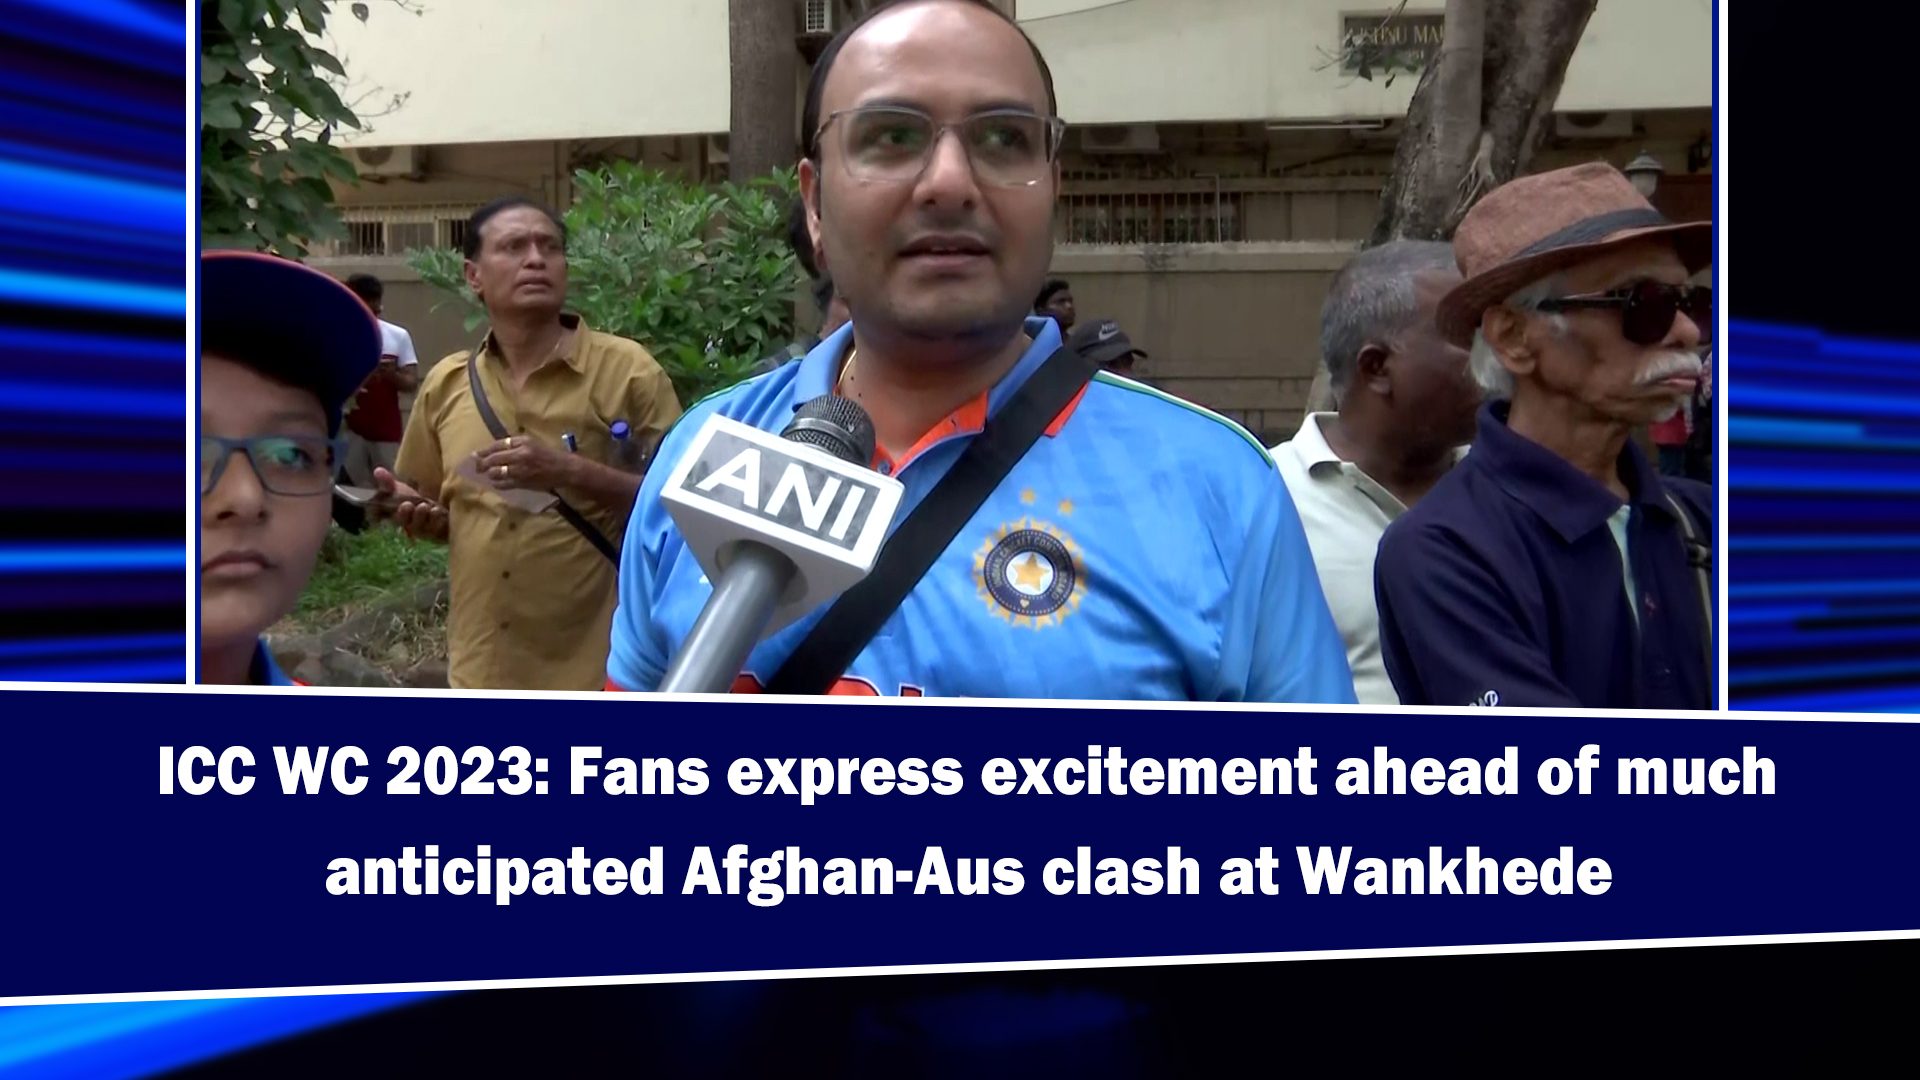 ICC WC 2023: Fans express excitement ahead of much anticipated Afghan-Aus clash at Wankhede